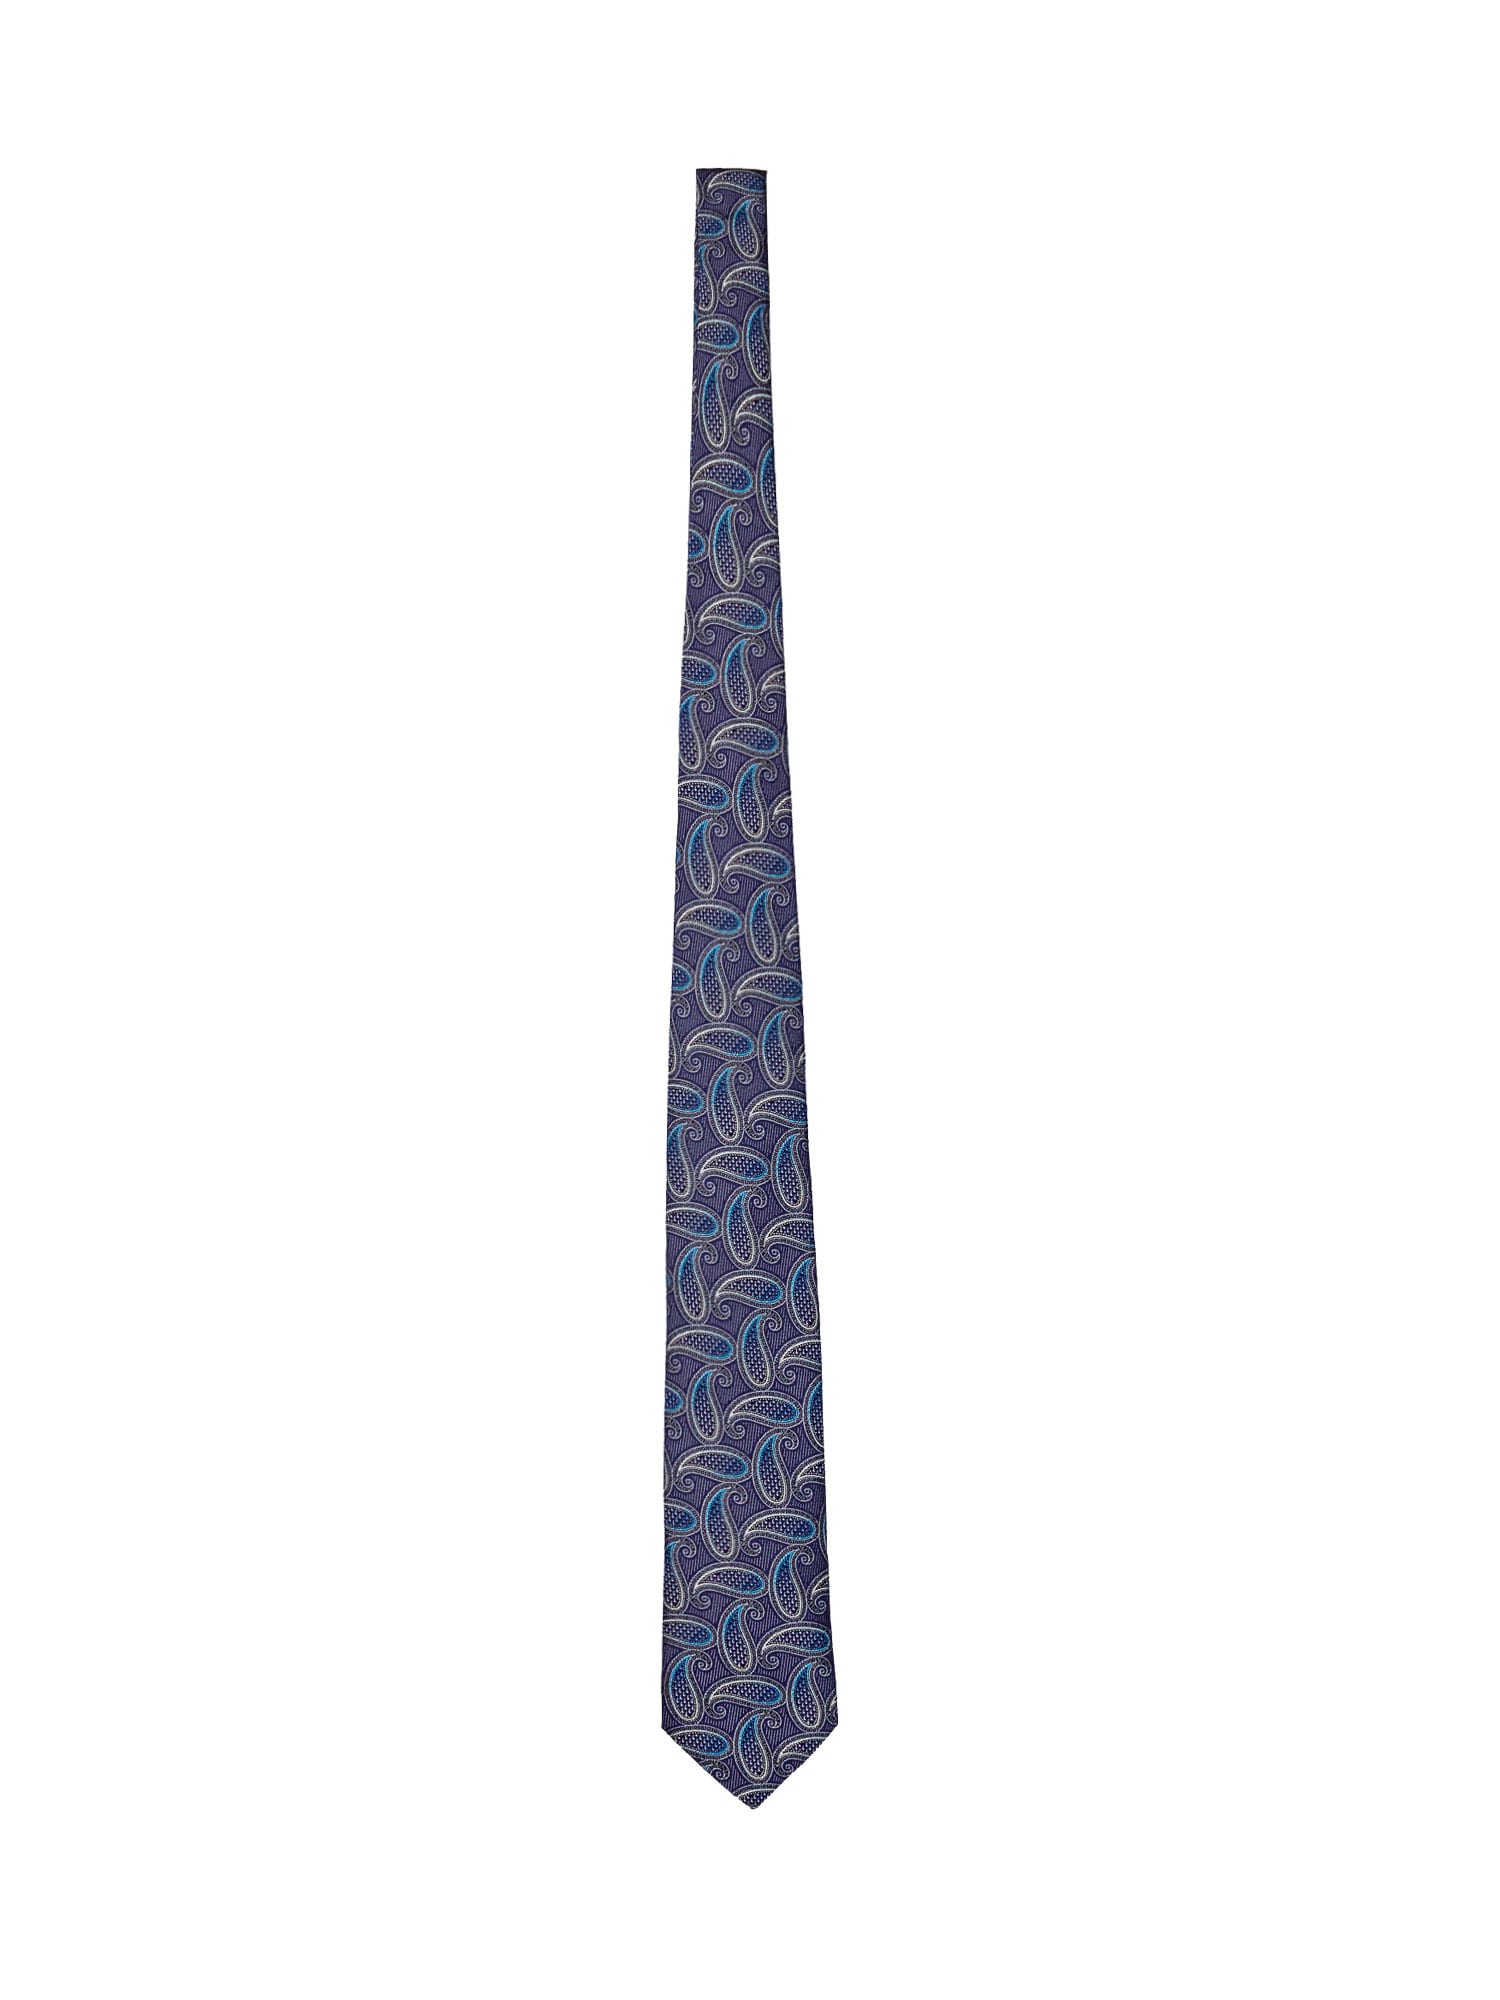 Patterned Tie